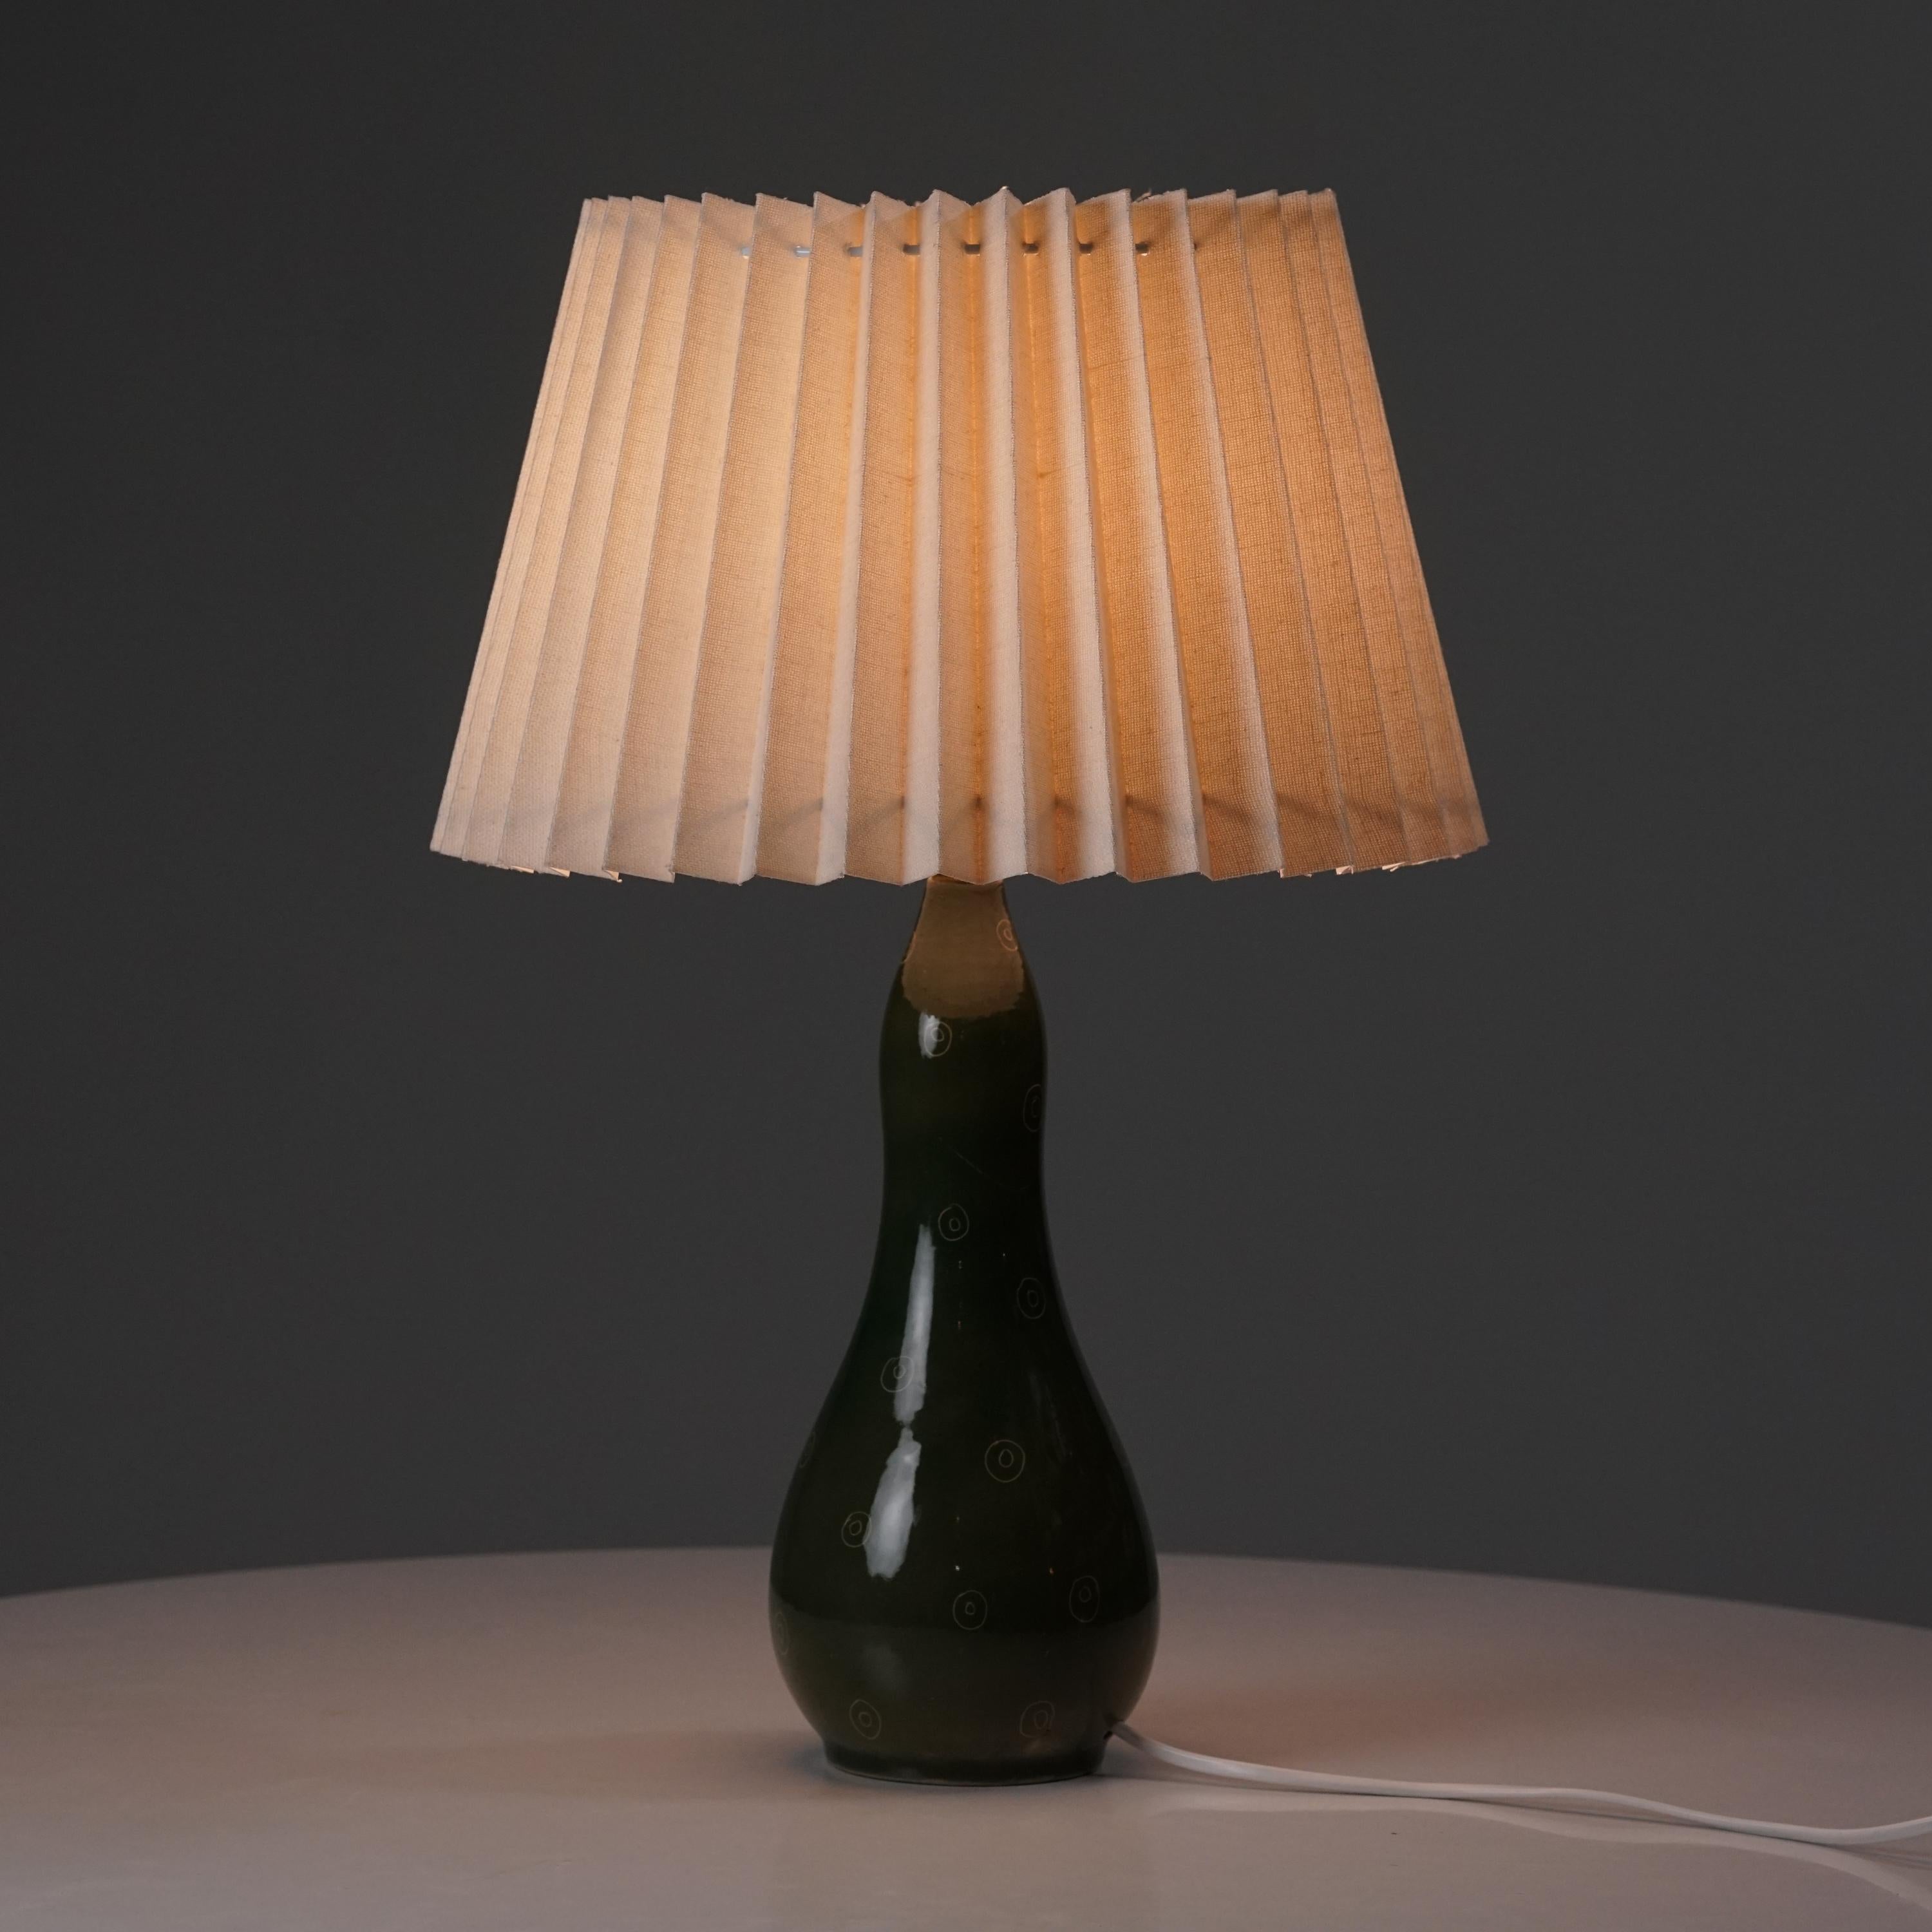 Toini Muona ceramic table lamp manufactured by Arabia, 1950s. Glazed ceramic frame, fabric shade. Marked. Good vintage condition, minor patina consistent with age and use. 

Toini Muona was a pioneer of modernism. Muona represented the sharpest edge